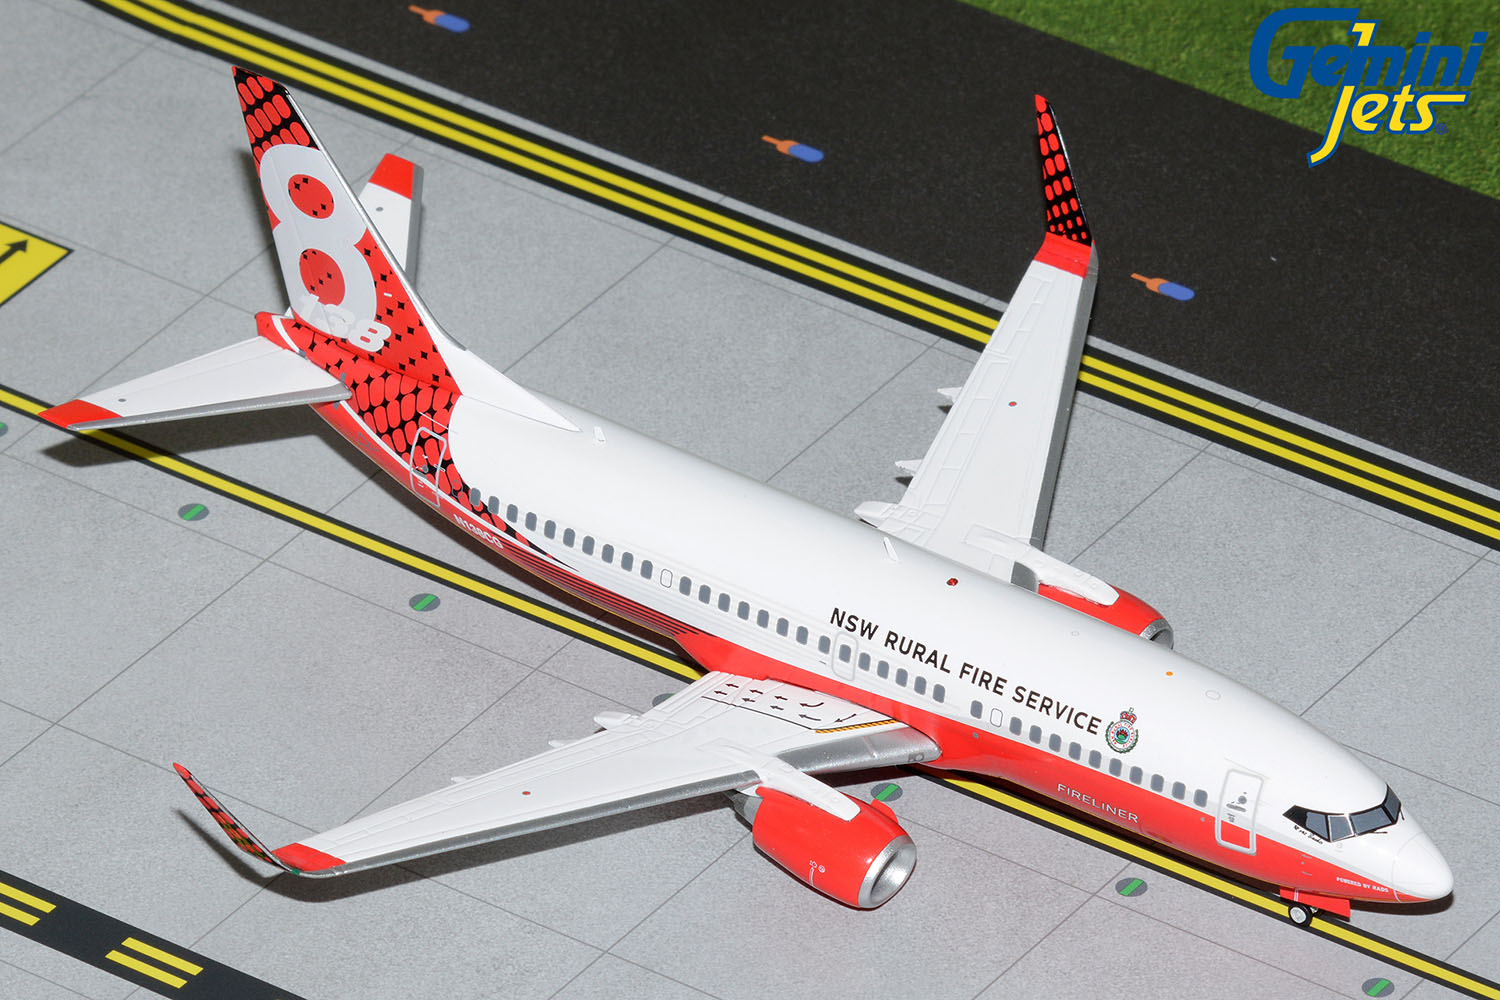 Gemini Jets 1:200 G2NSW994 NSW Rural Free Service/Coulson Aviation 737-300